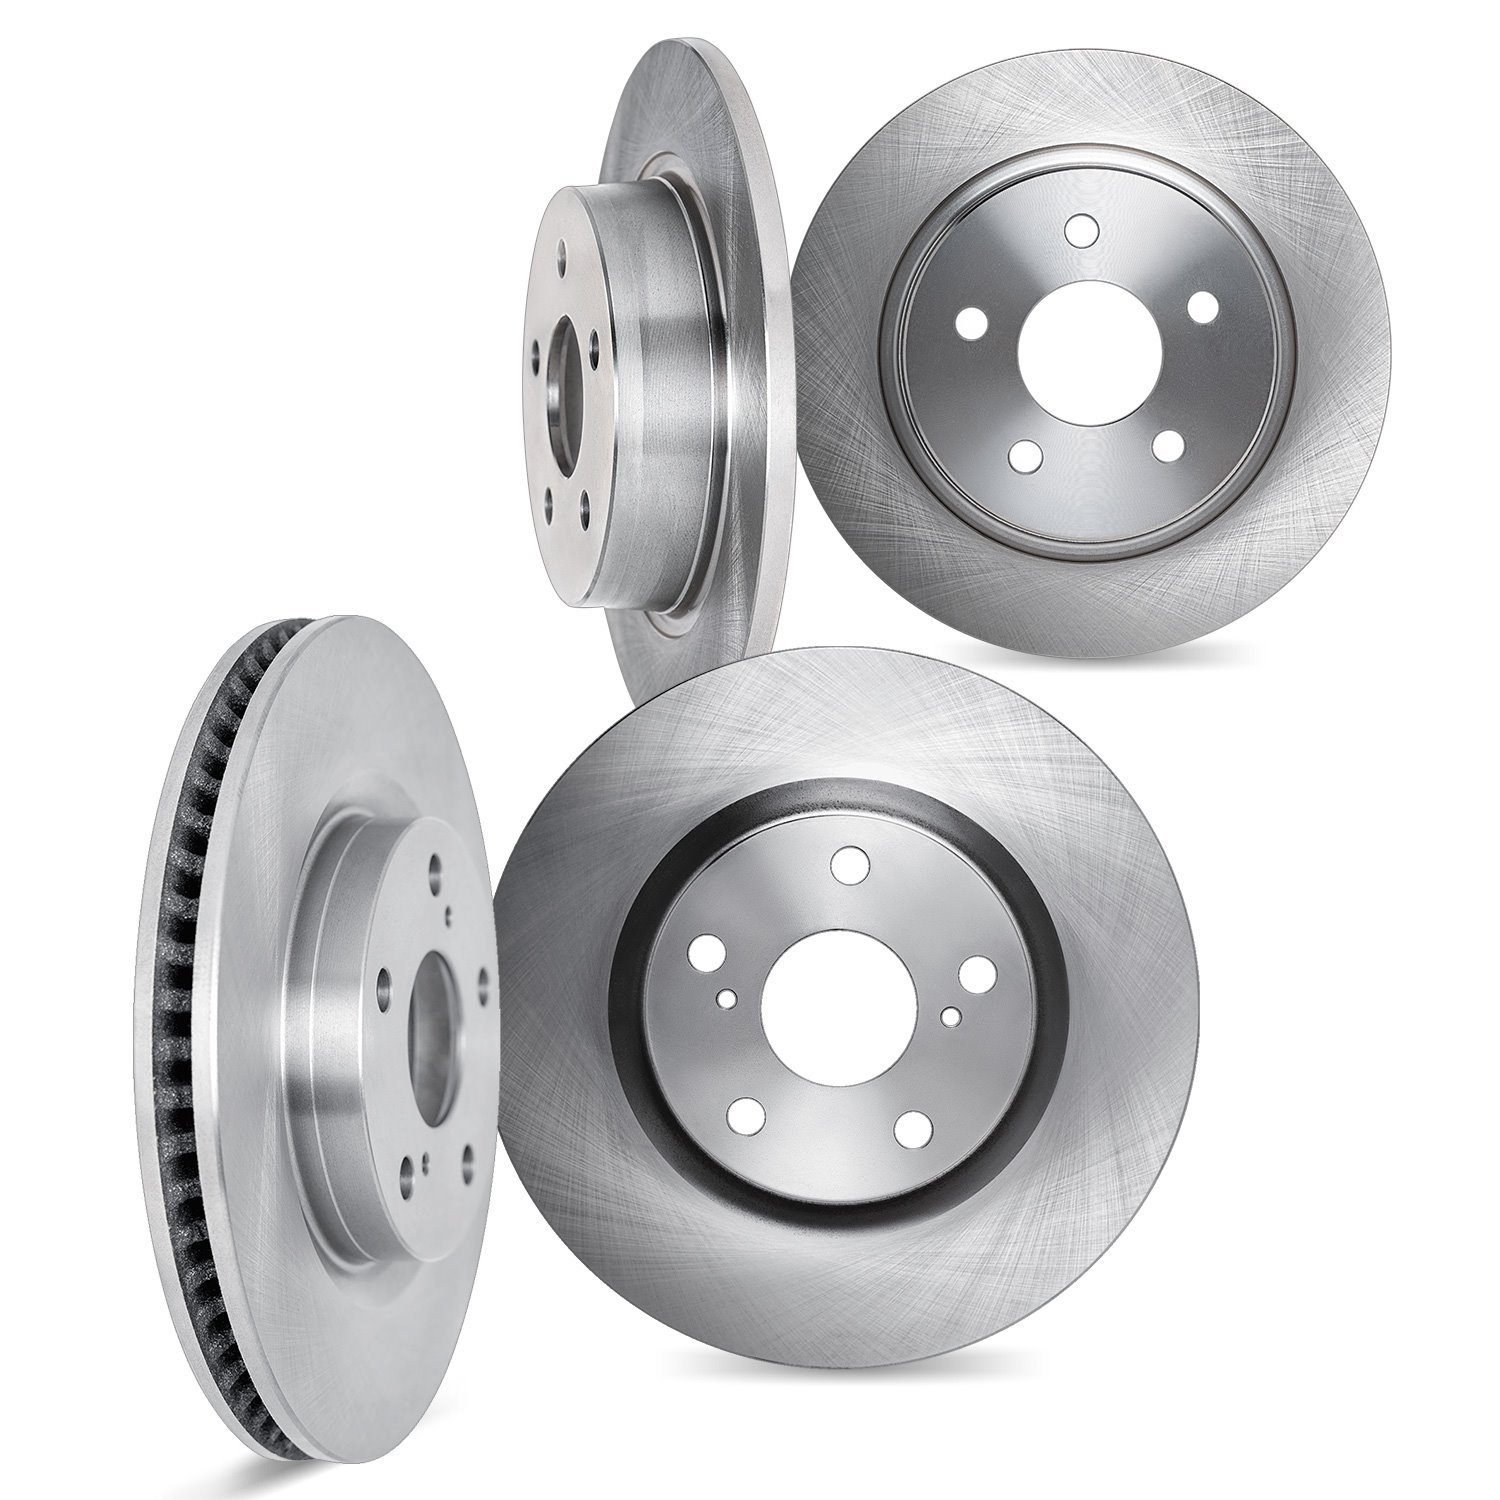 6004-31088 Brake Rotors, Fits Select Multiple Makes/Models, Position: Front and Rear